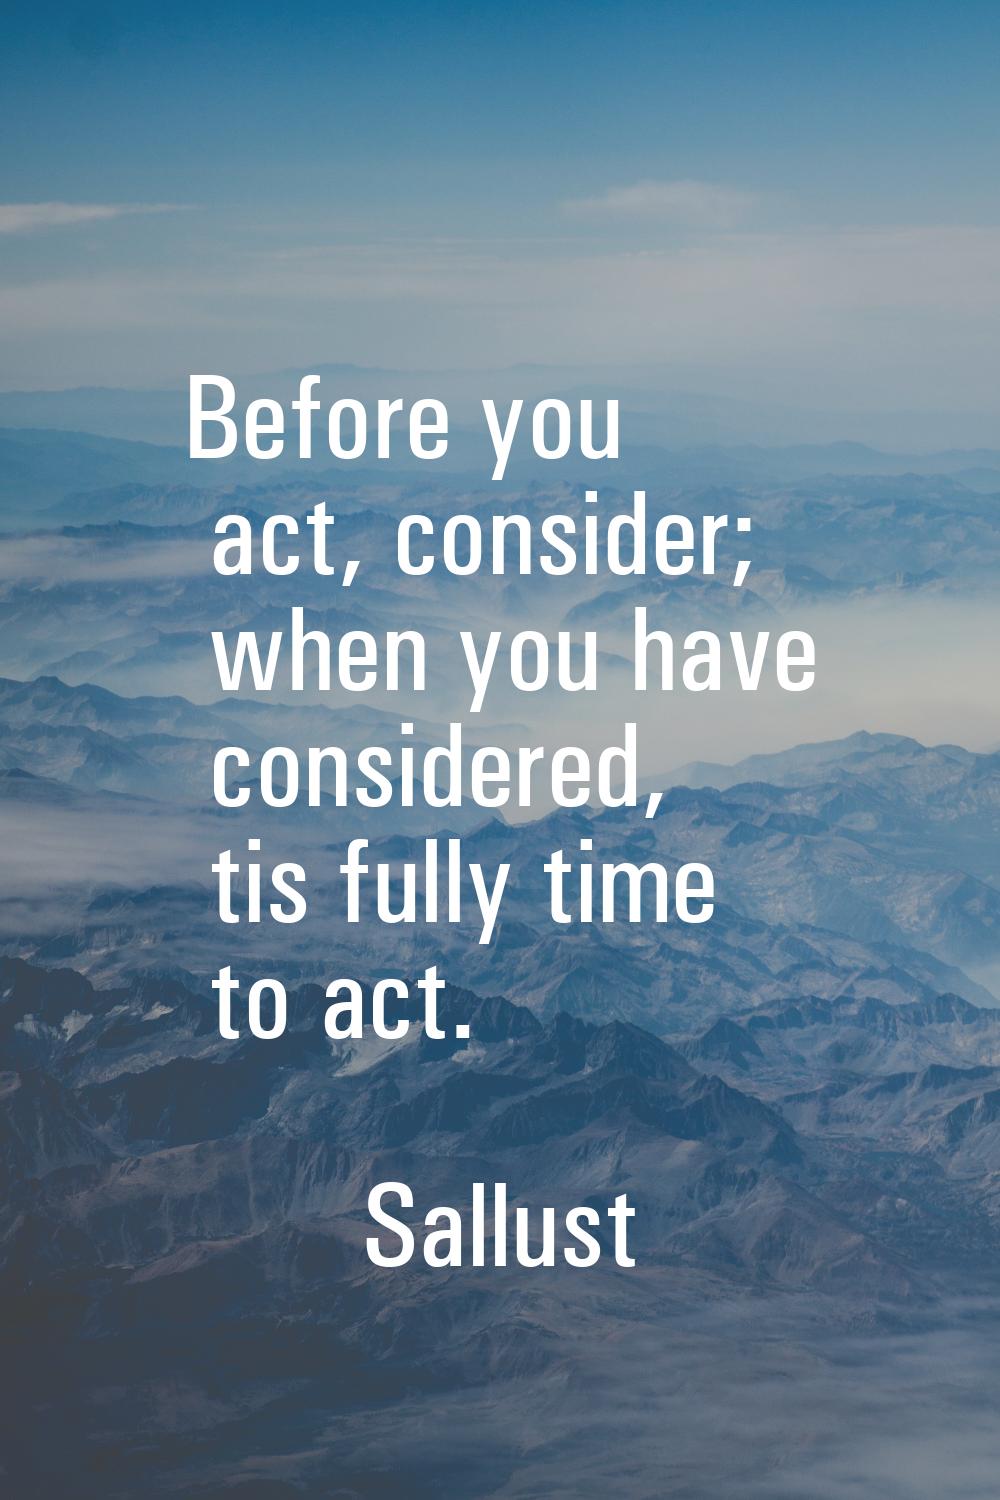 Before you act, consider; when you have considered, tis fully time to act.